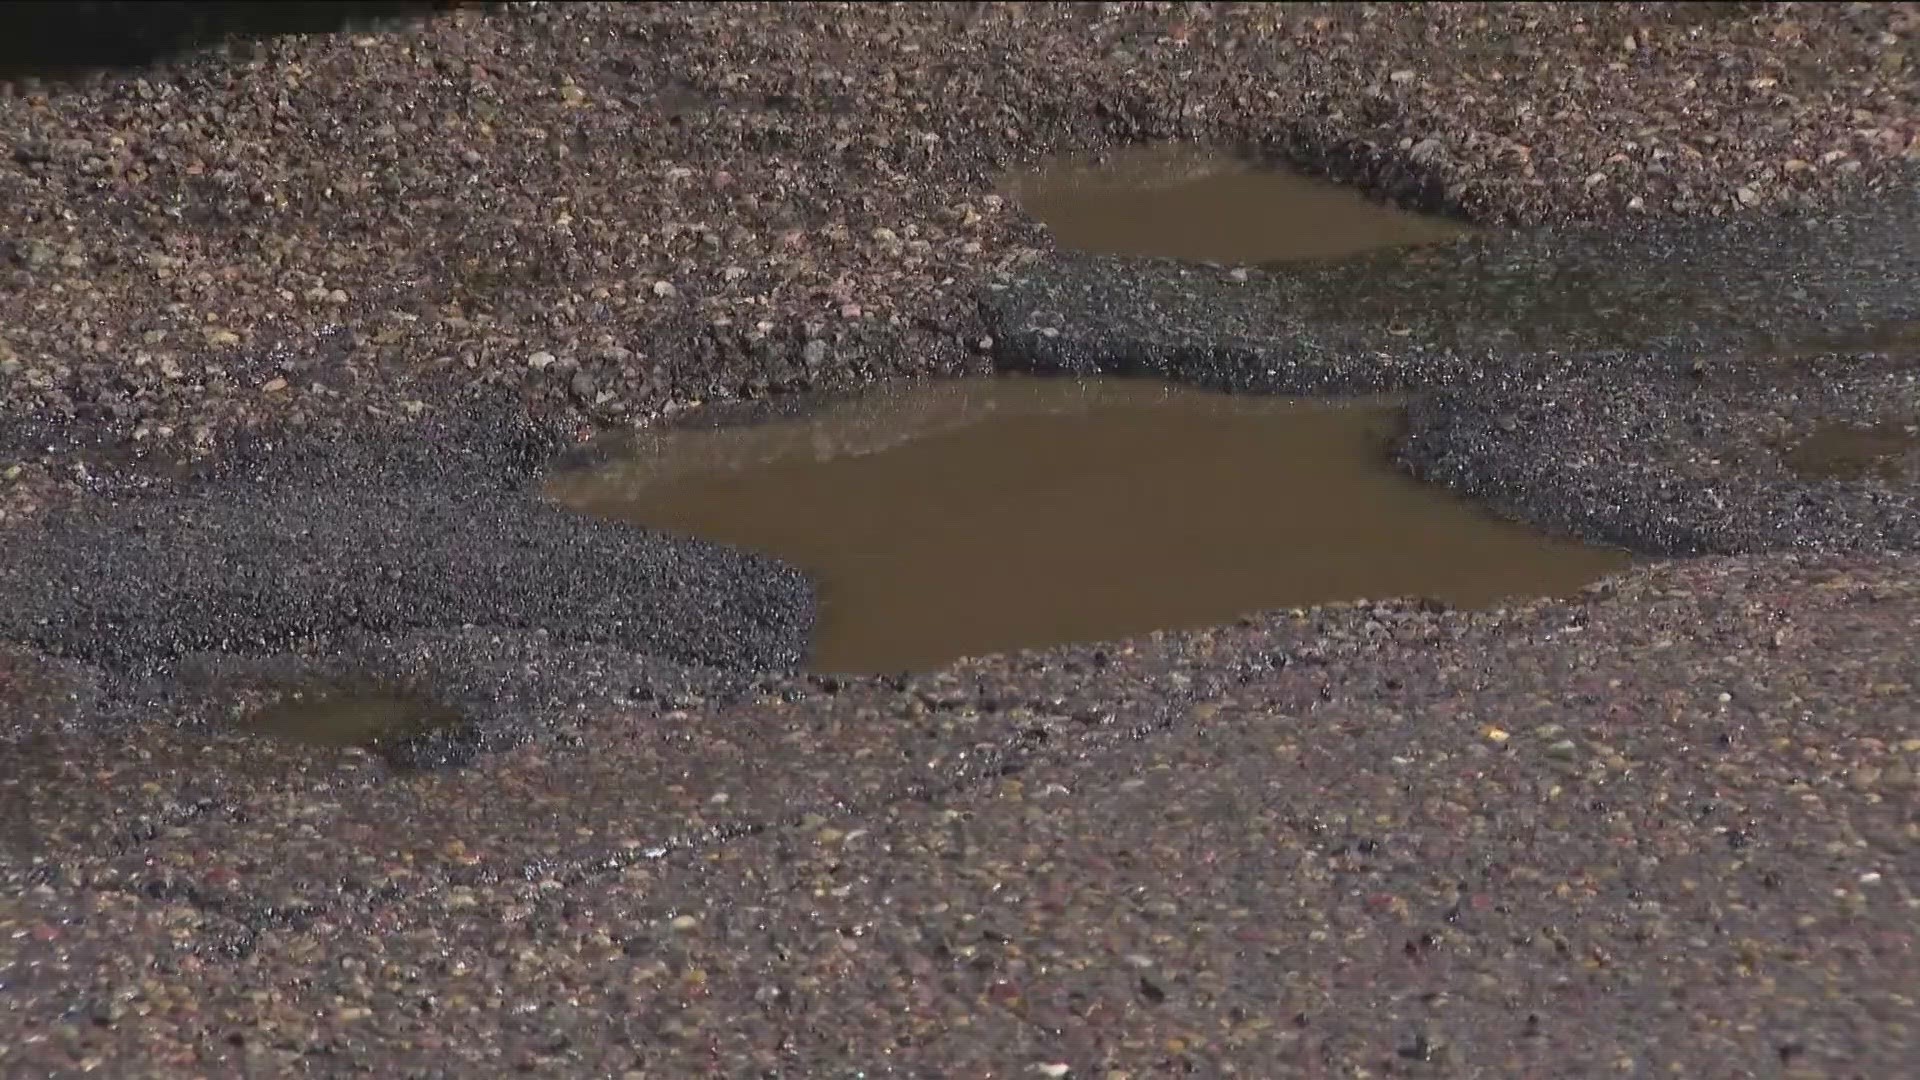 More than 19,000 pothole complaints have been reported this year. More than last year and the year before.